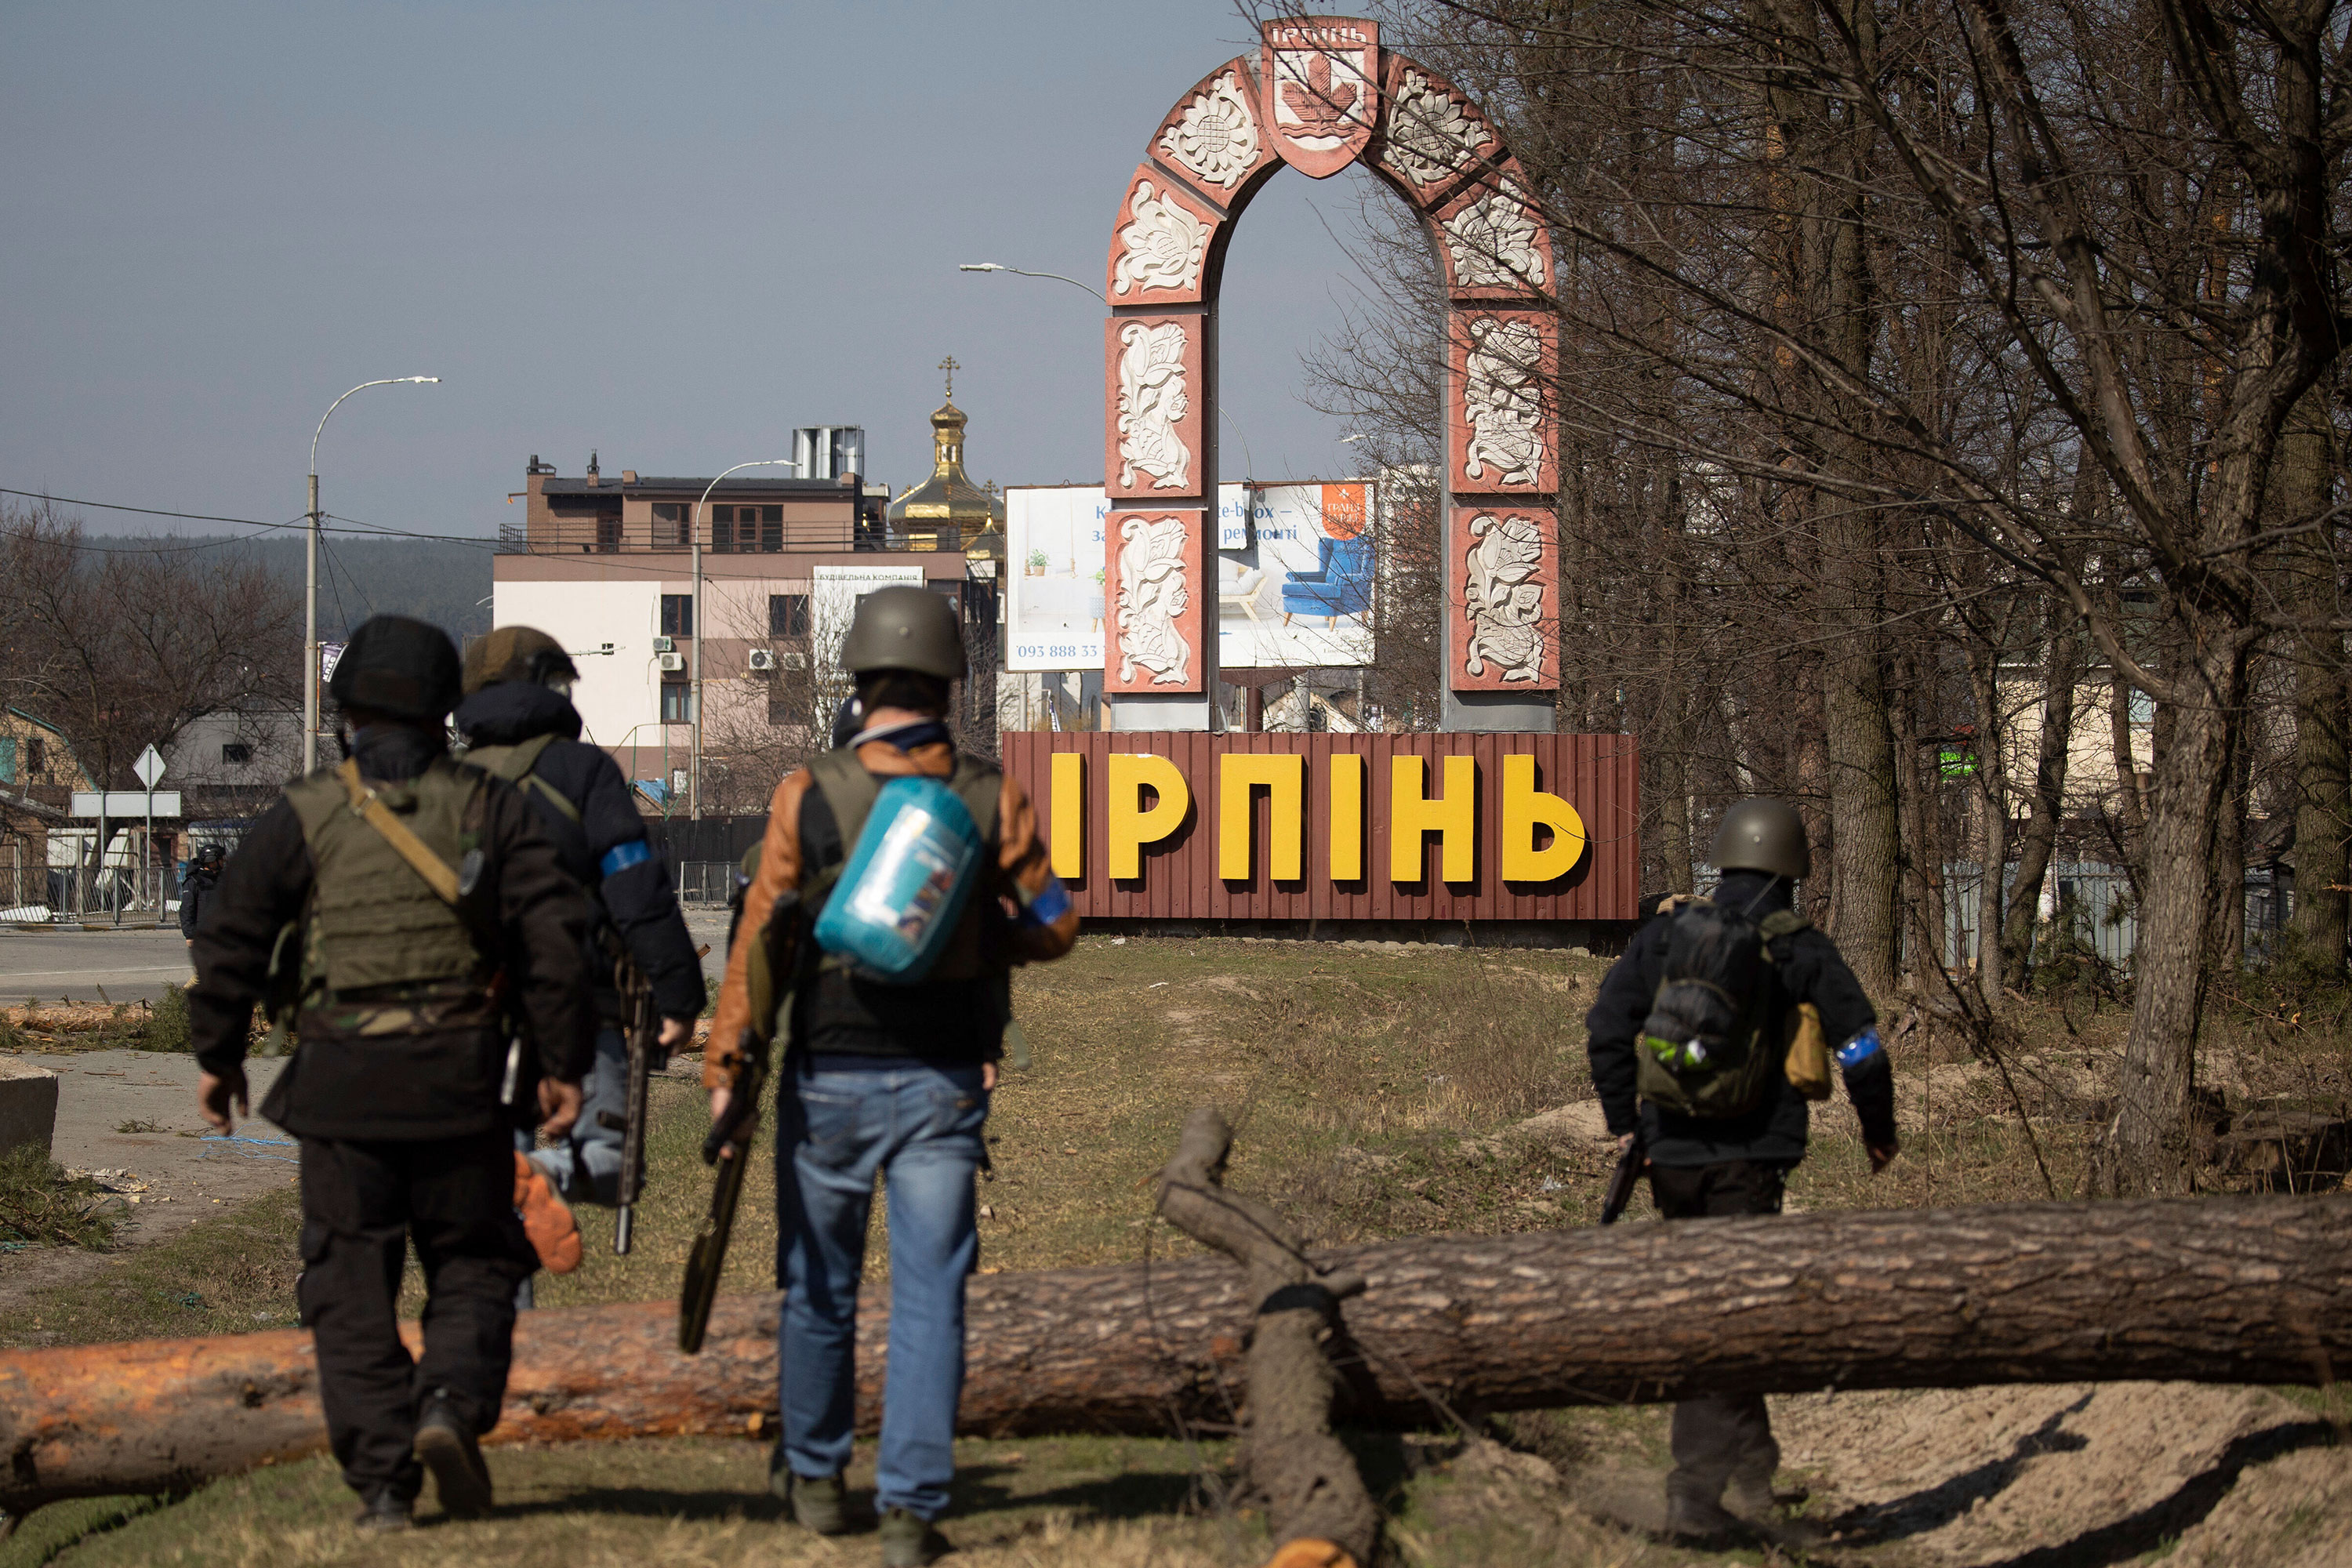 Ukrainian soldiers walk toward a sign at the entrance to the city of Irpin on March 29.